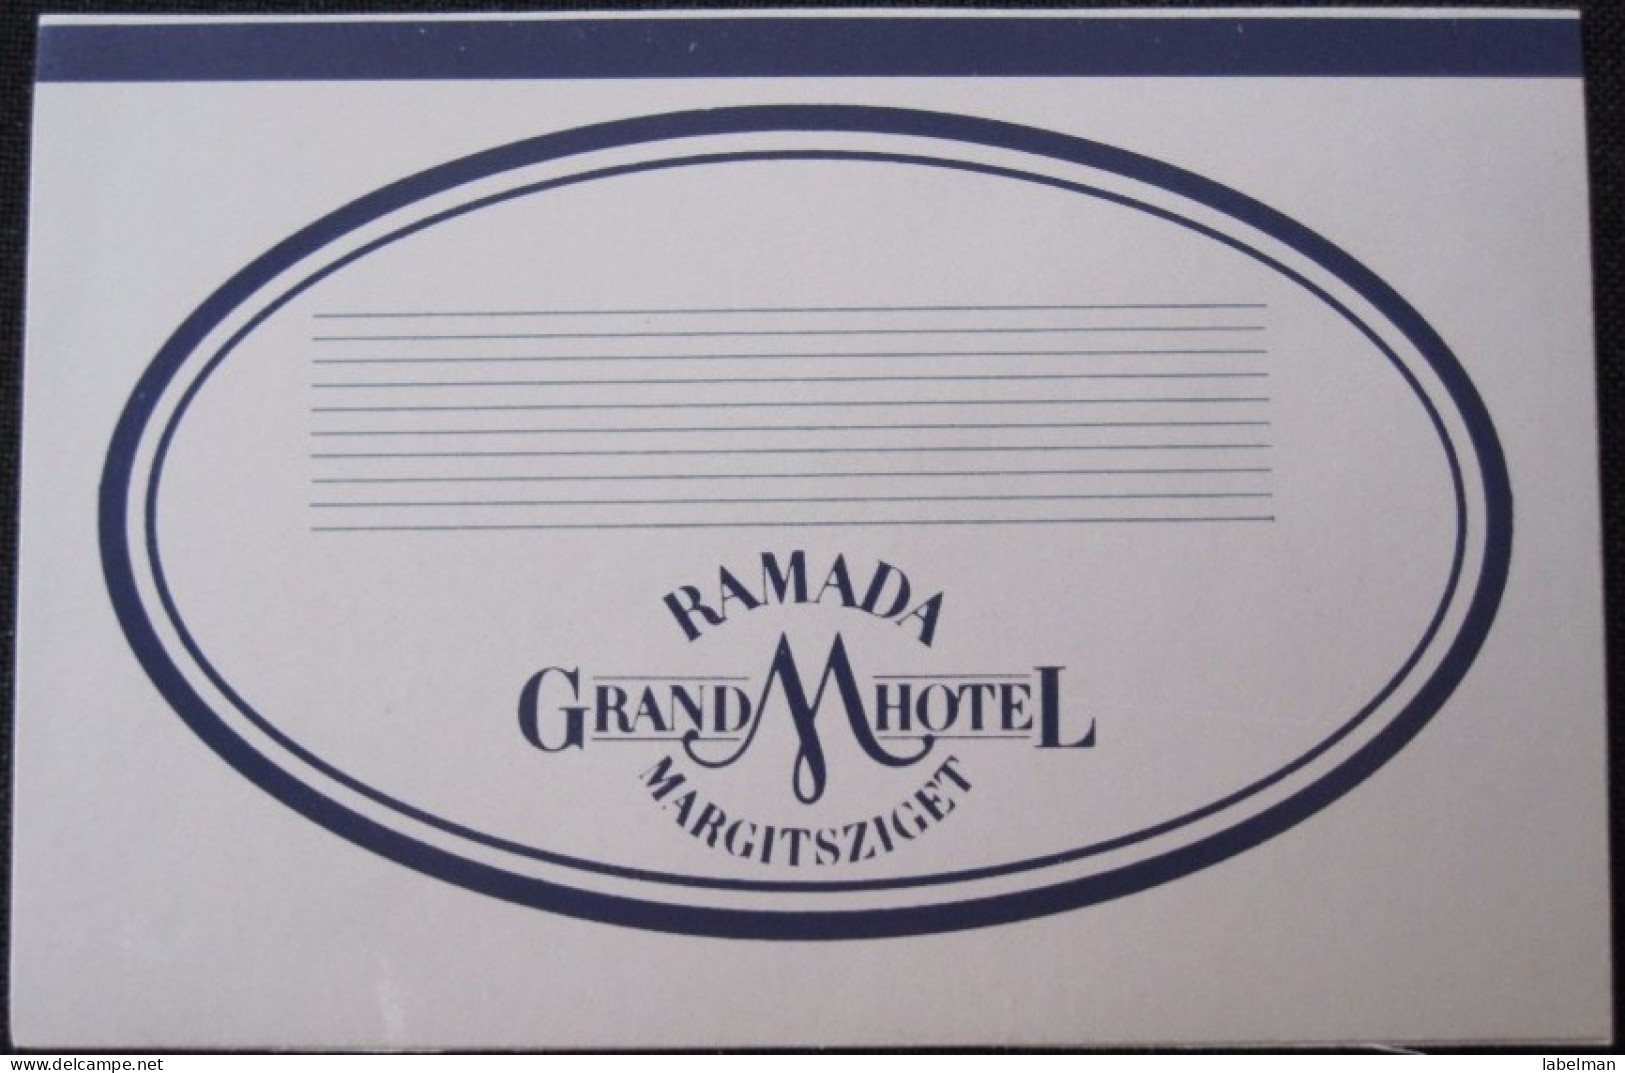 MISC HOTEL SZALLO PENSION RAMADA GRAND BUDAPEST HUNGARIA HUNGARY HONGRIE DECAL STICKER LUGGAGE LABEL ETIQUETTE AUFKLEBER - Hotel Labels